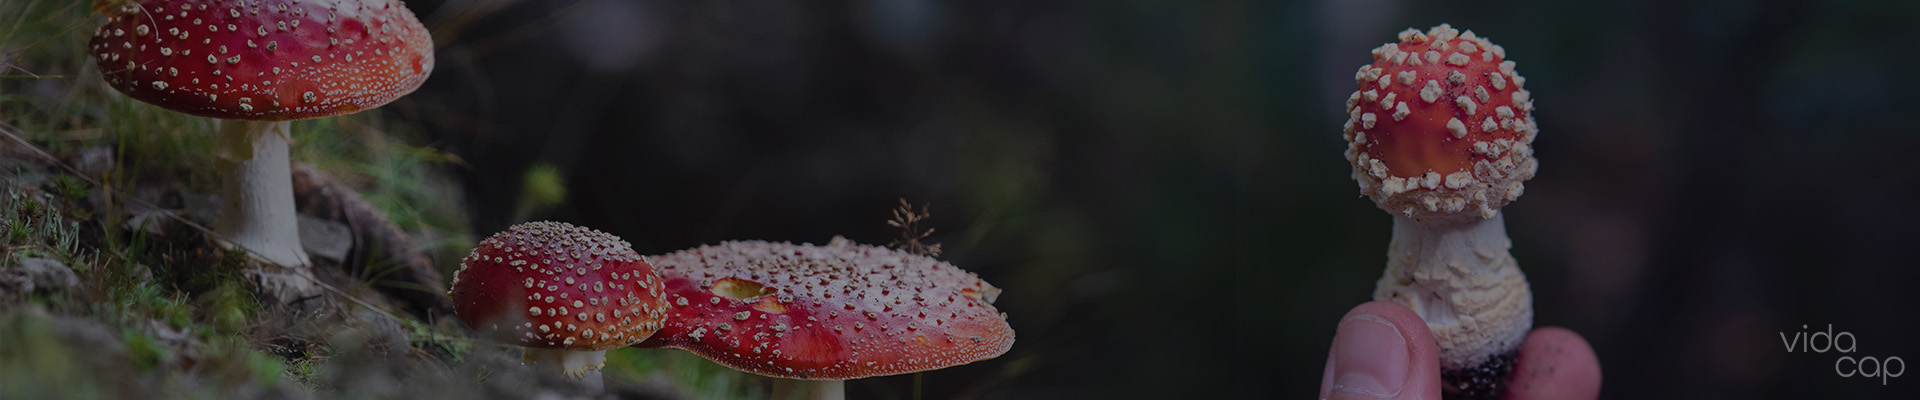 vc-banner-what_are_the_effects_of_amanita_muscari